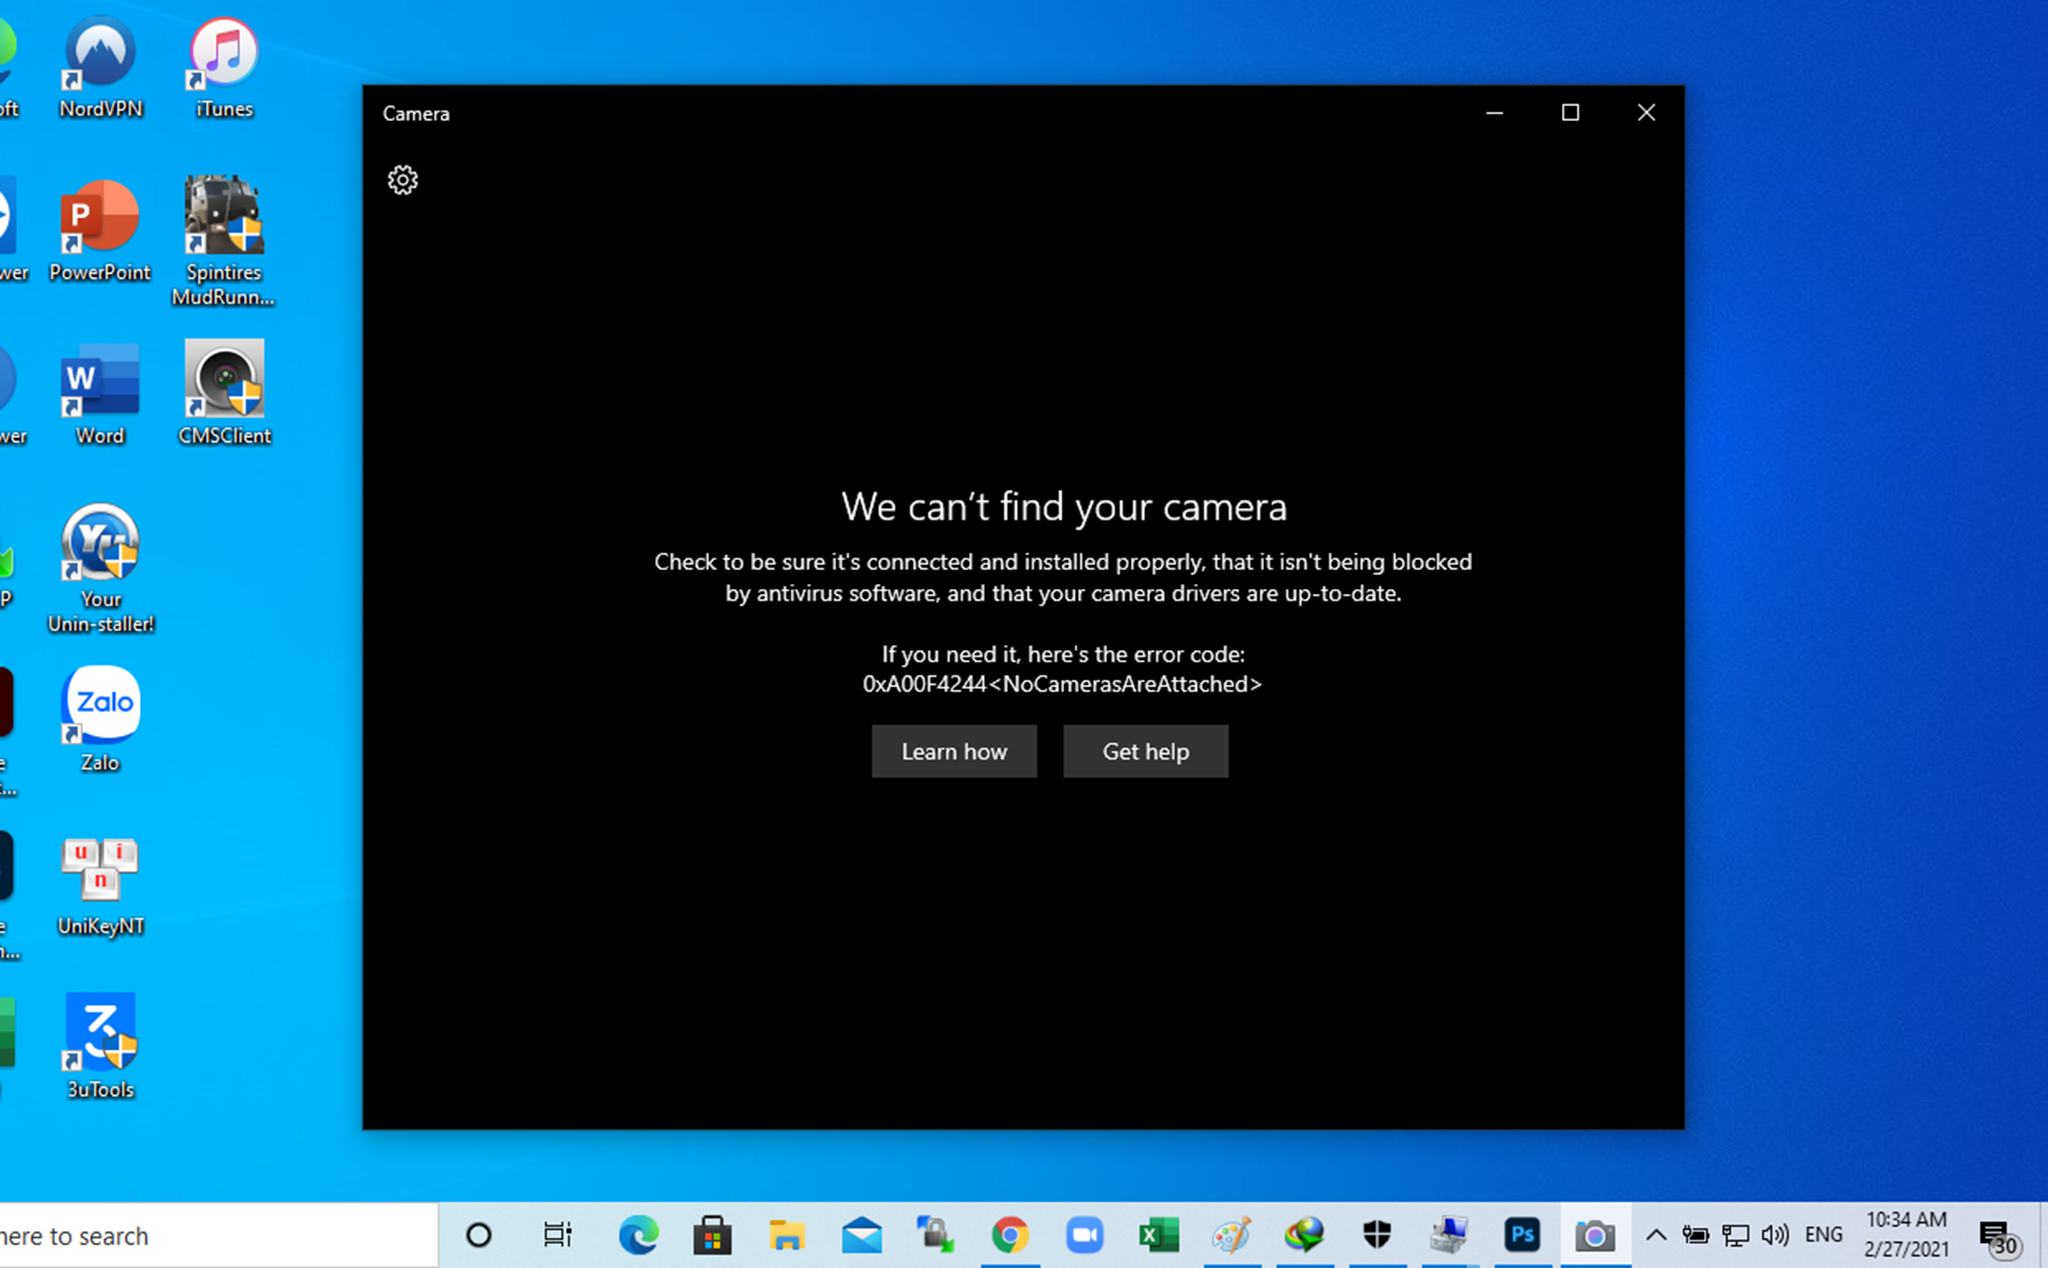 Fix error 0xA00F4244 we can't find your camera on Windows 10